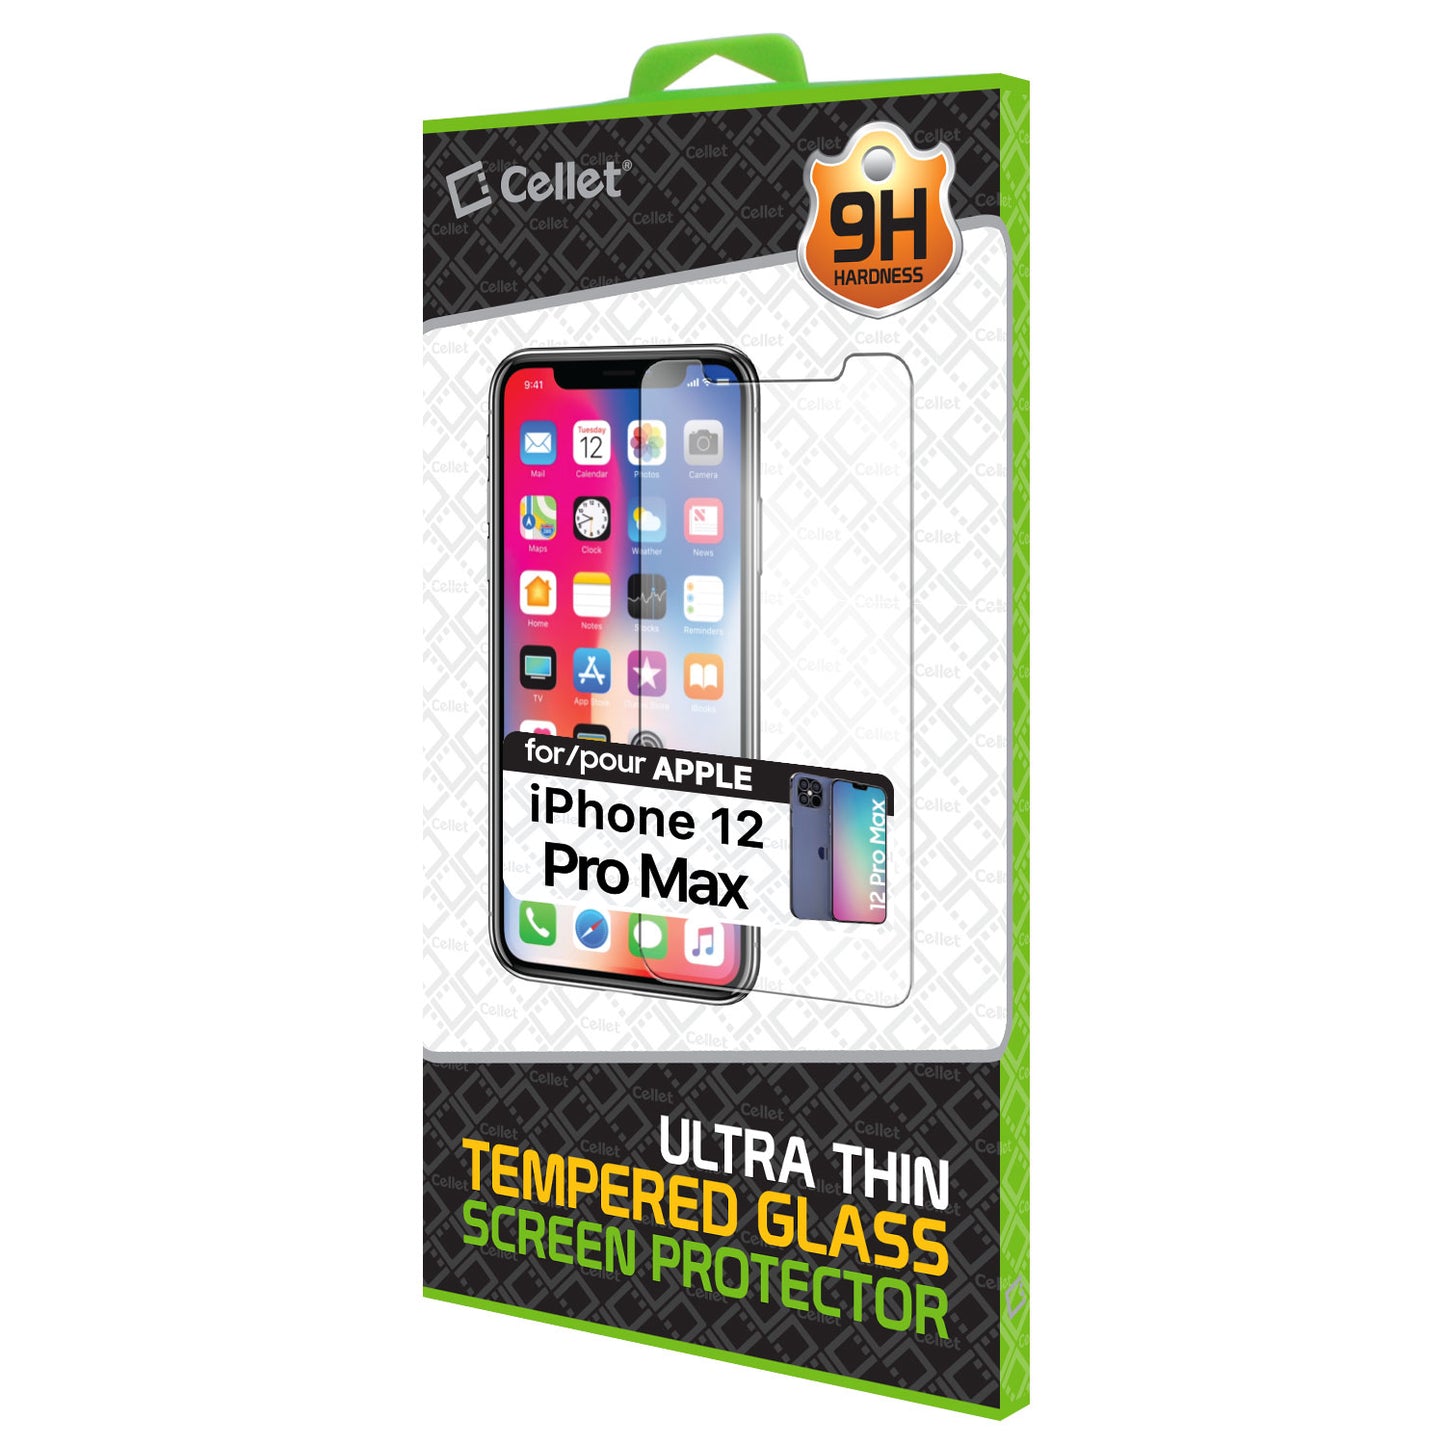 iPhone 12 Pro, Privacy Tempered Glass Screen Protector for Apple iPhone 12 Pro (0.8mm) by Cellet